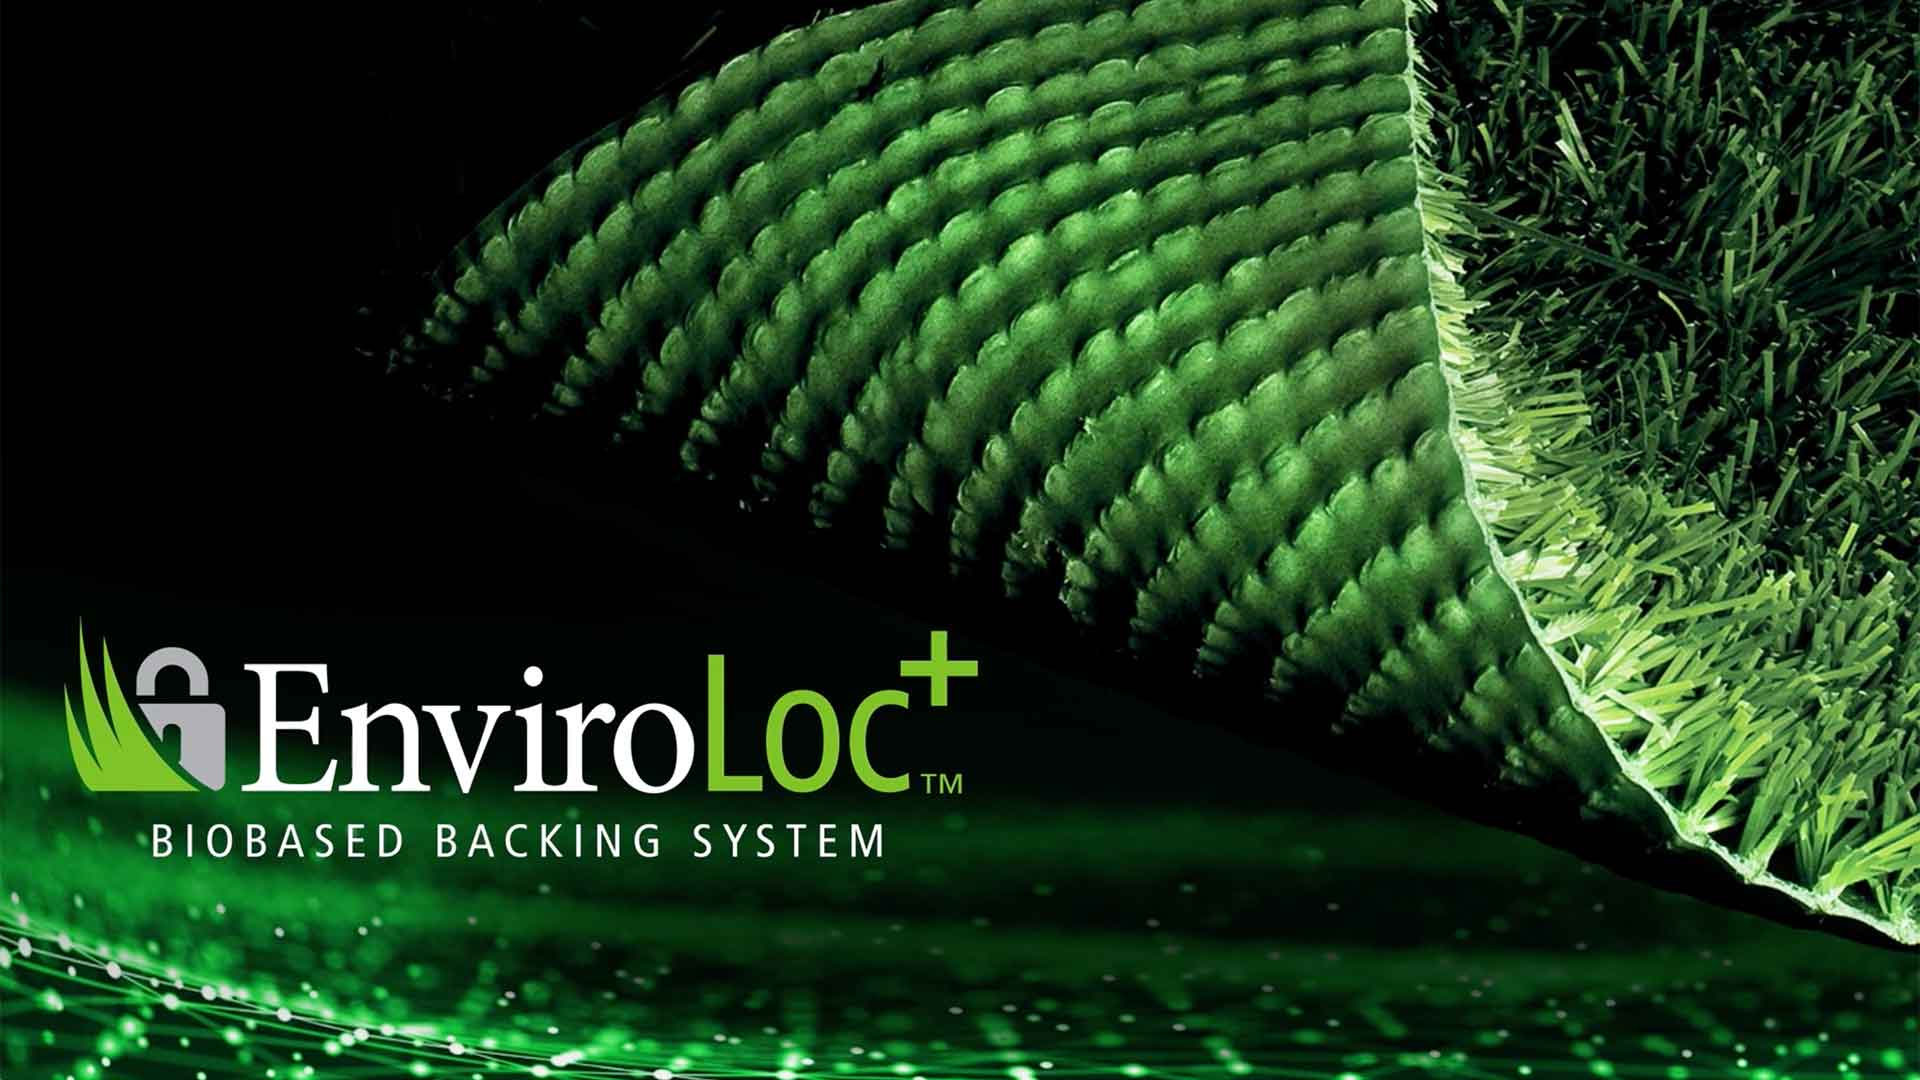 SYNLawn Debuts Exclusive EnviroLoc+ Backing System